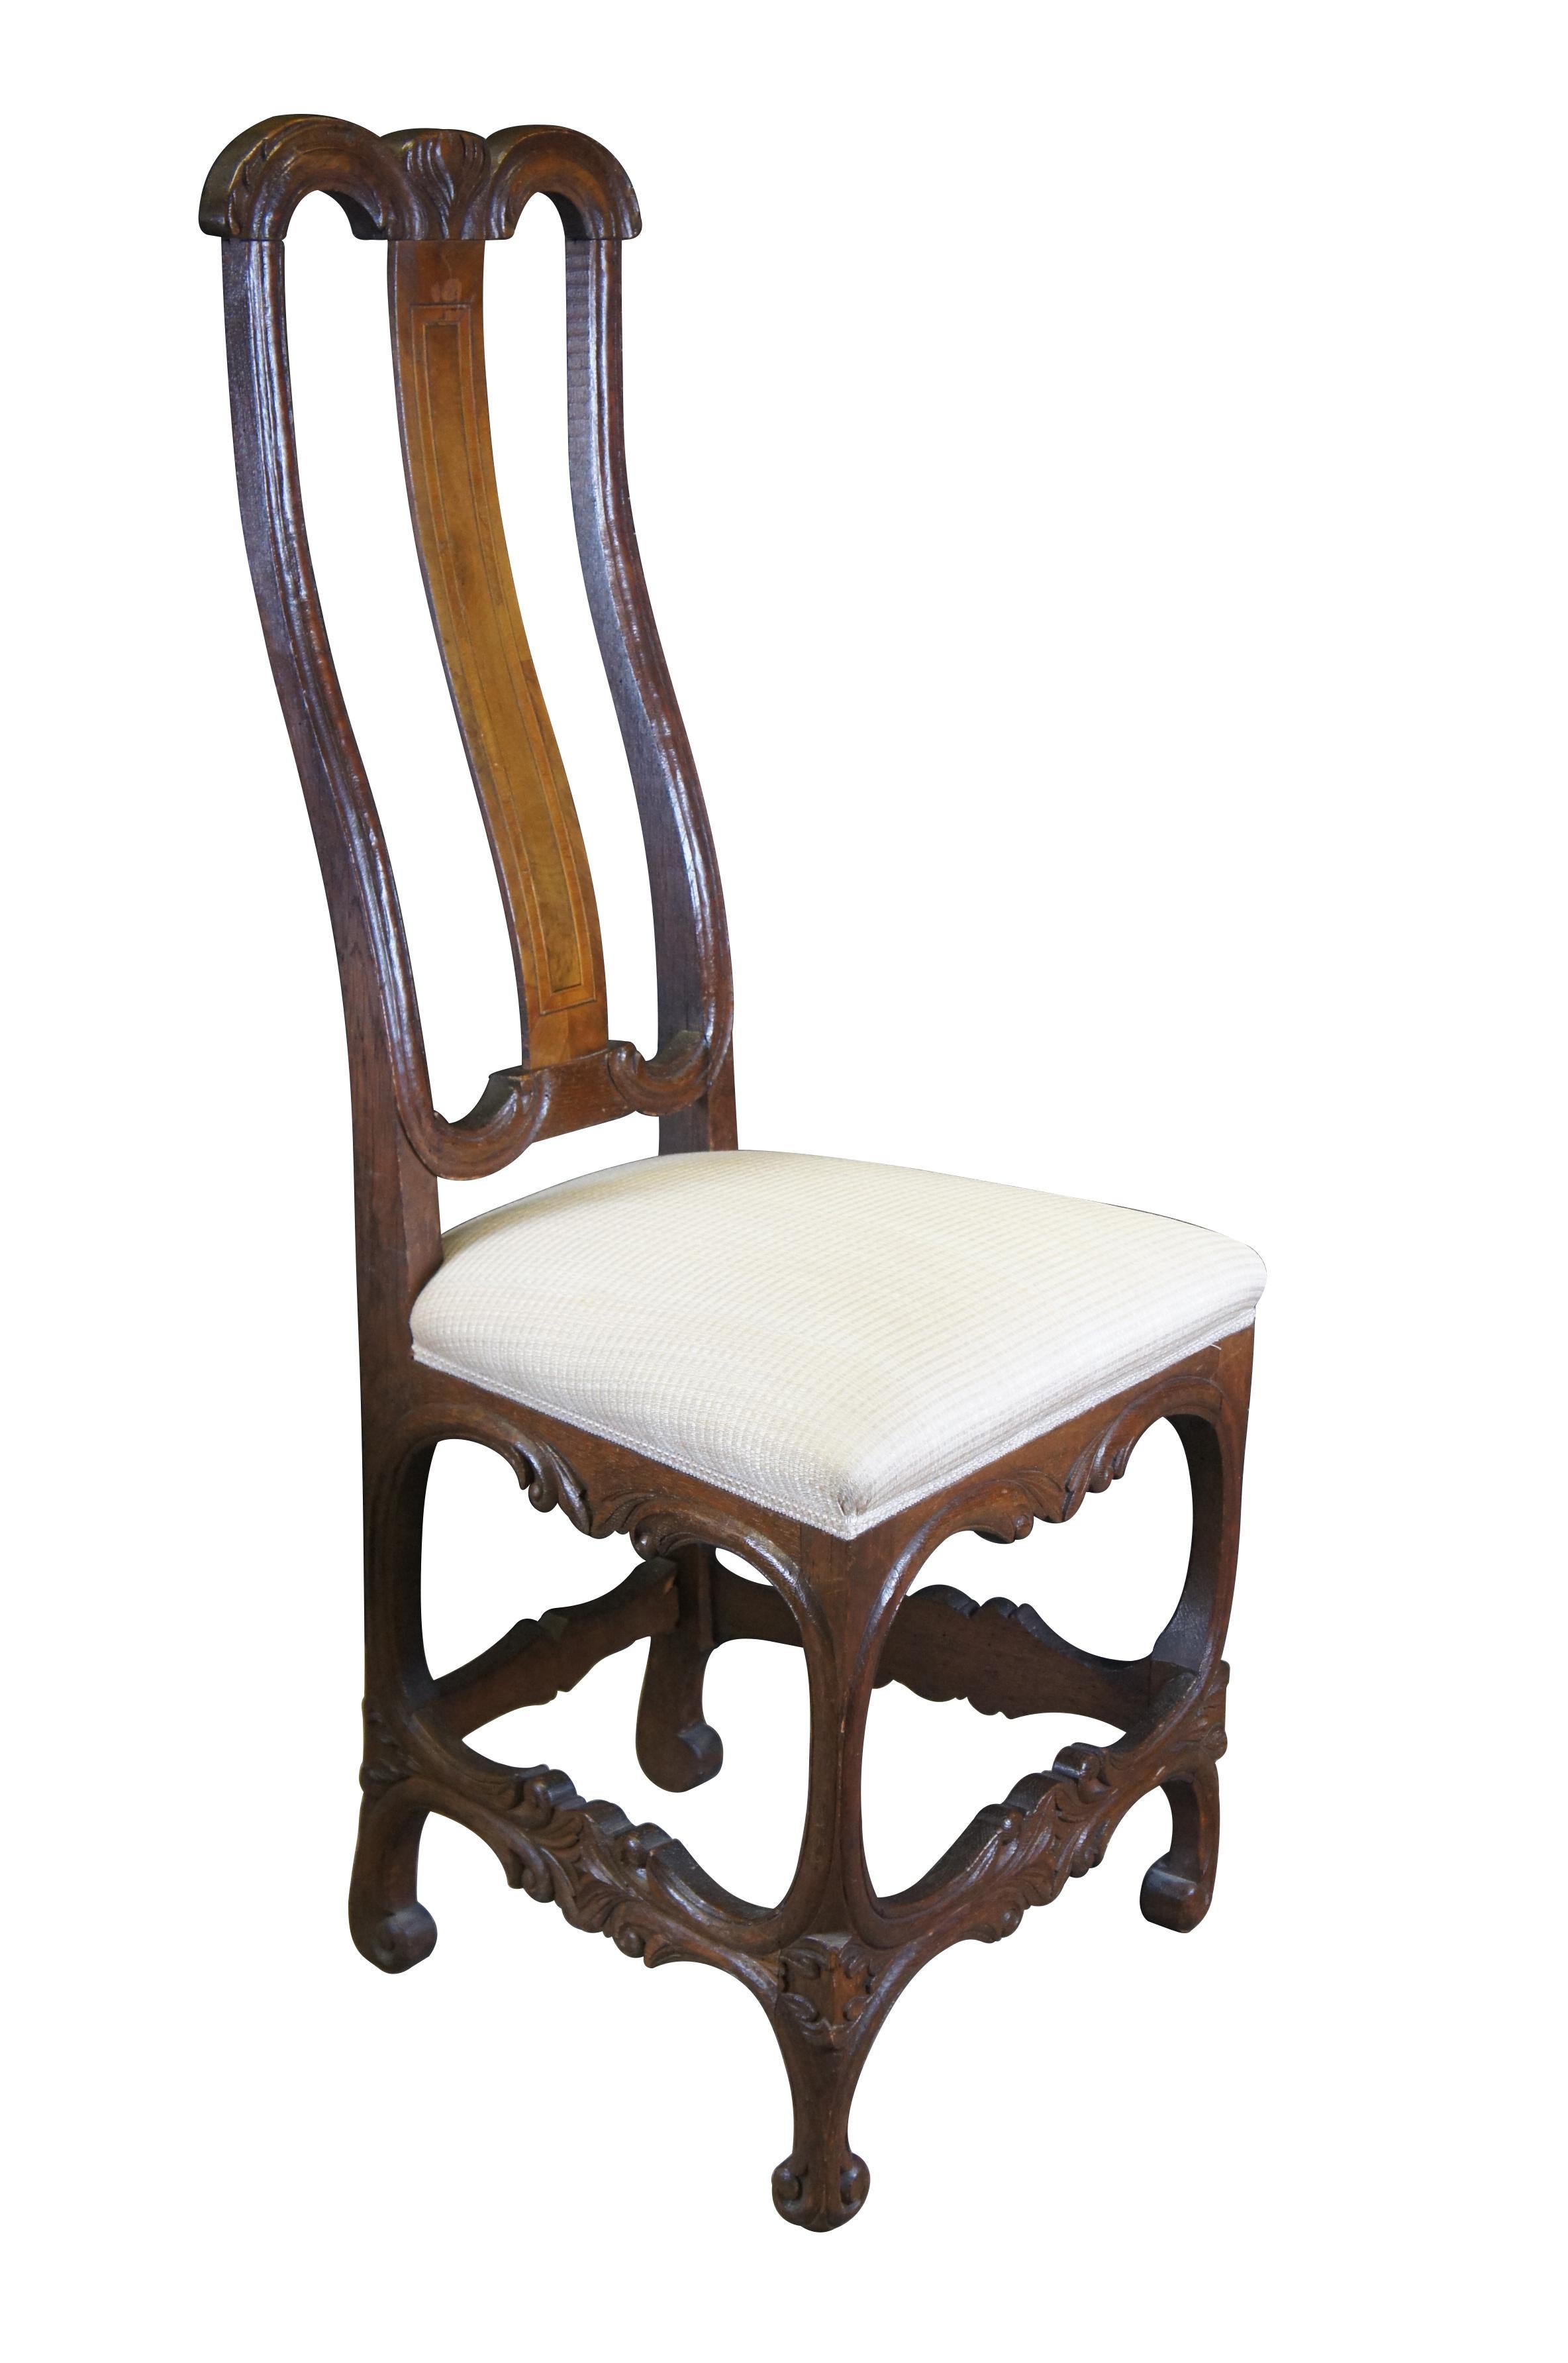 2 Antique German Baroque Carved Oak & Mahogany Inlaid Dining Chairs In Fair Condition For Sale In Dayton, OH